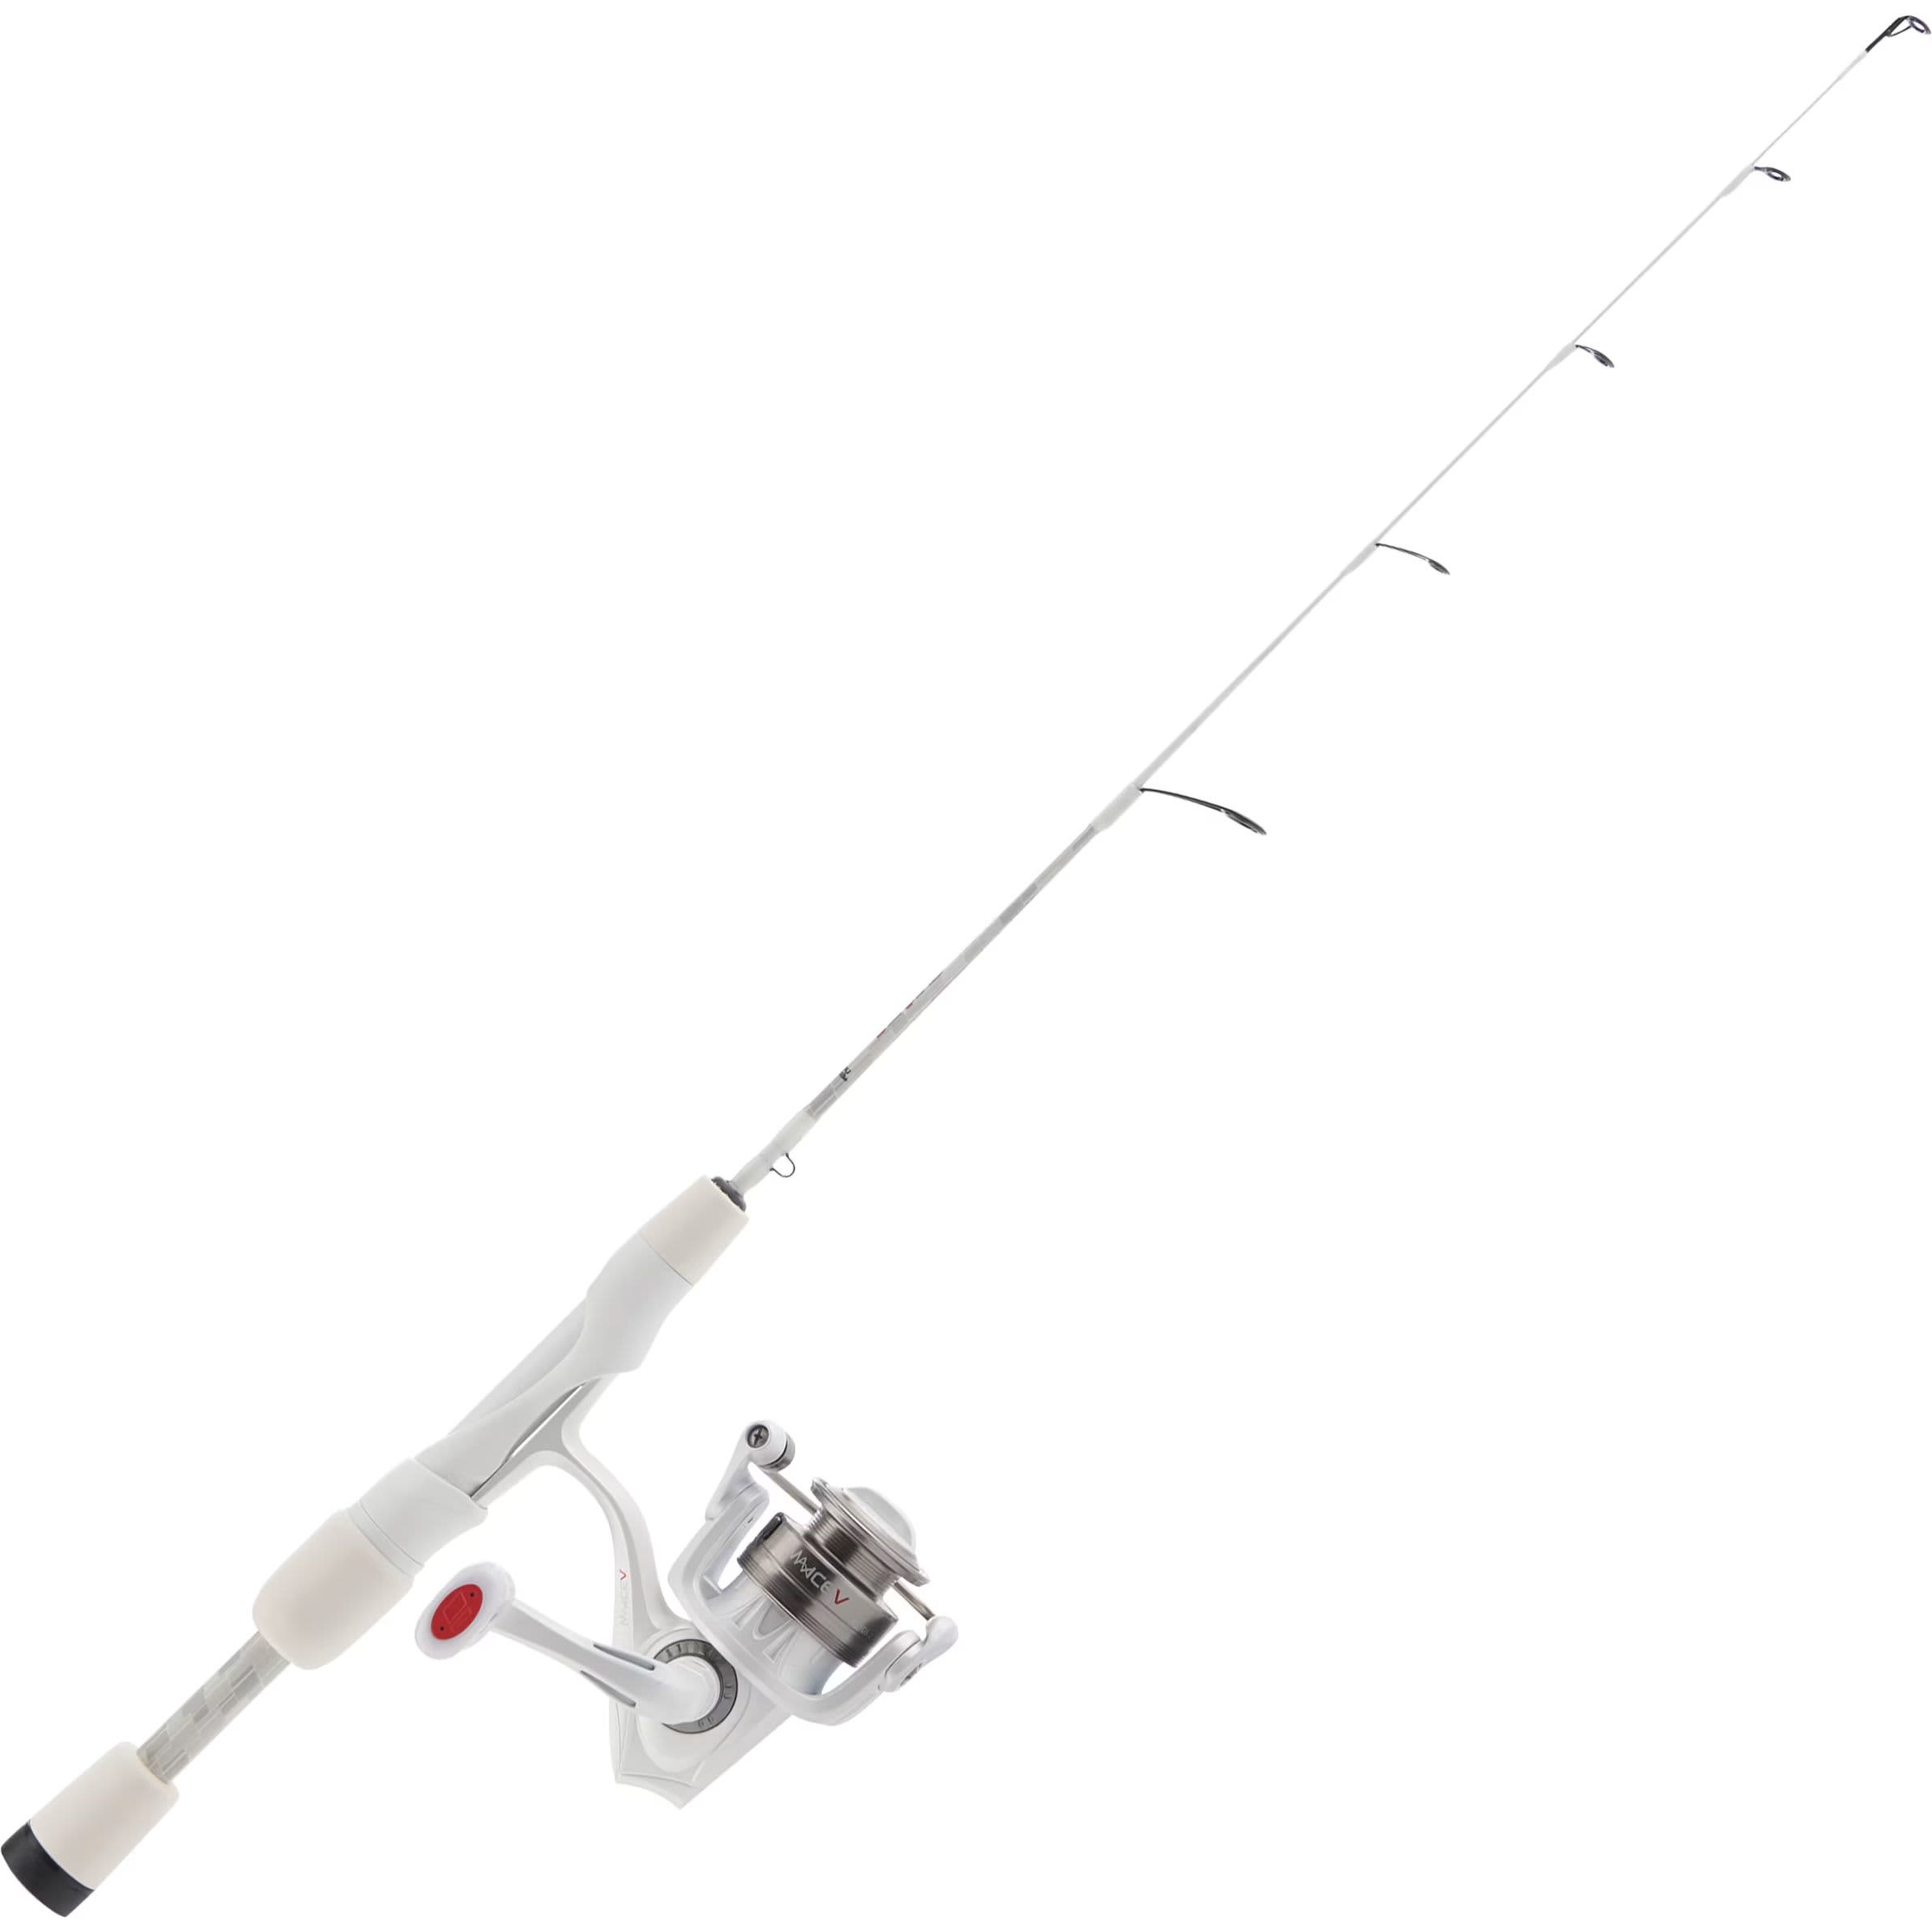 Best Ice Fishing Rod & Reel Combos: Ice Rod & Reel Combos for